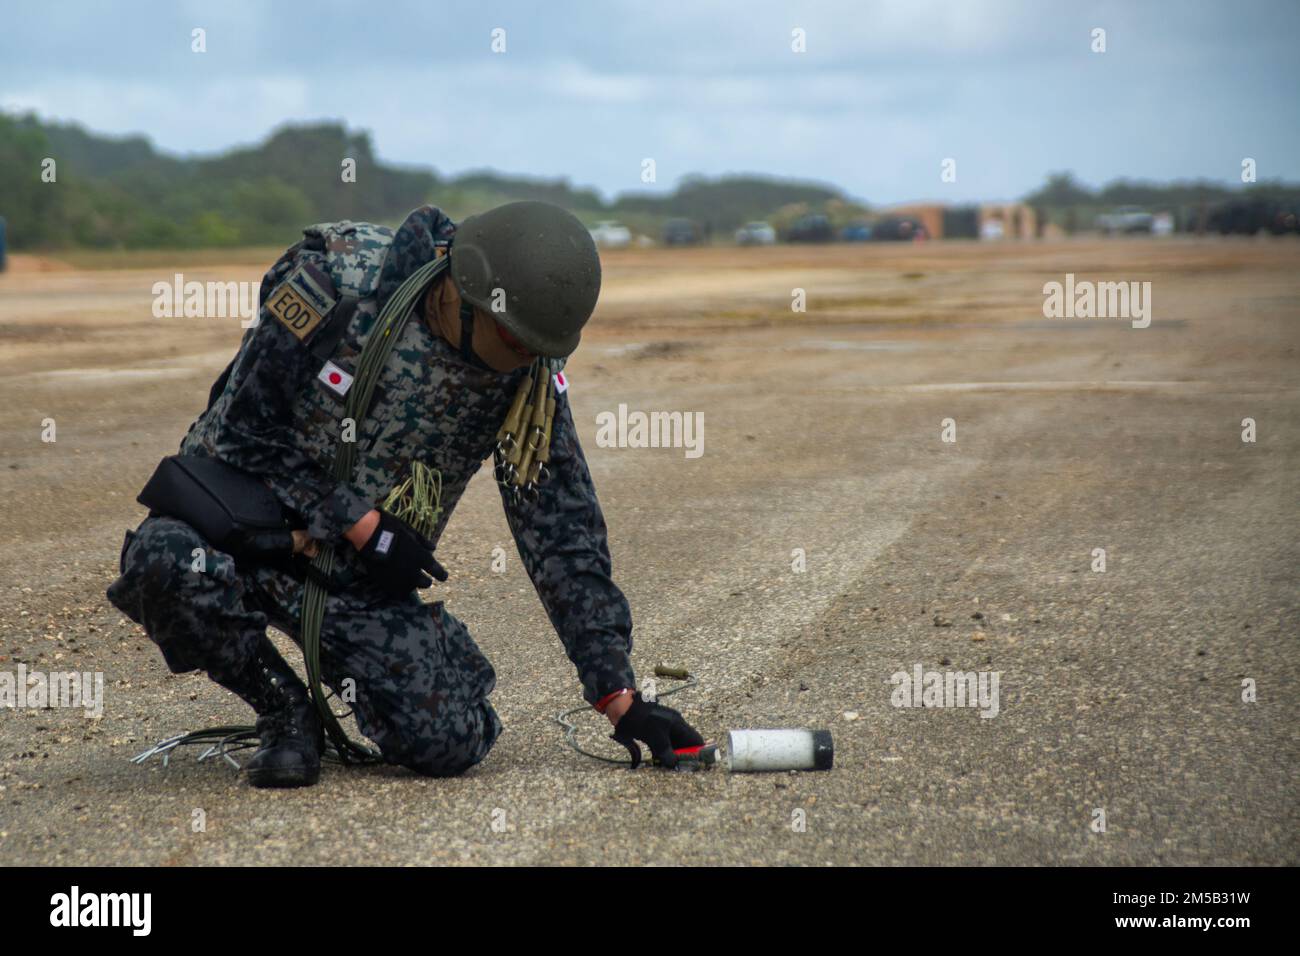 An explosive ordnance disposal technician with the Japan Air Self-Defense Force places explosive charges while conducting rapid explosive hazard mitigation training (REHM) during Cope North 2022 at Andersen Air Force Base, Guam Feb. 17, 2022. The training, hosted by the U.S. Air Forces 554th Red Horse Squadron, focuses on the rapid clearing of unexploded ordnance in response to an airfield attack allowing for safe airfield repair and continued operations. Stock Photo